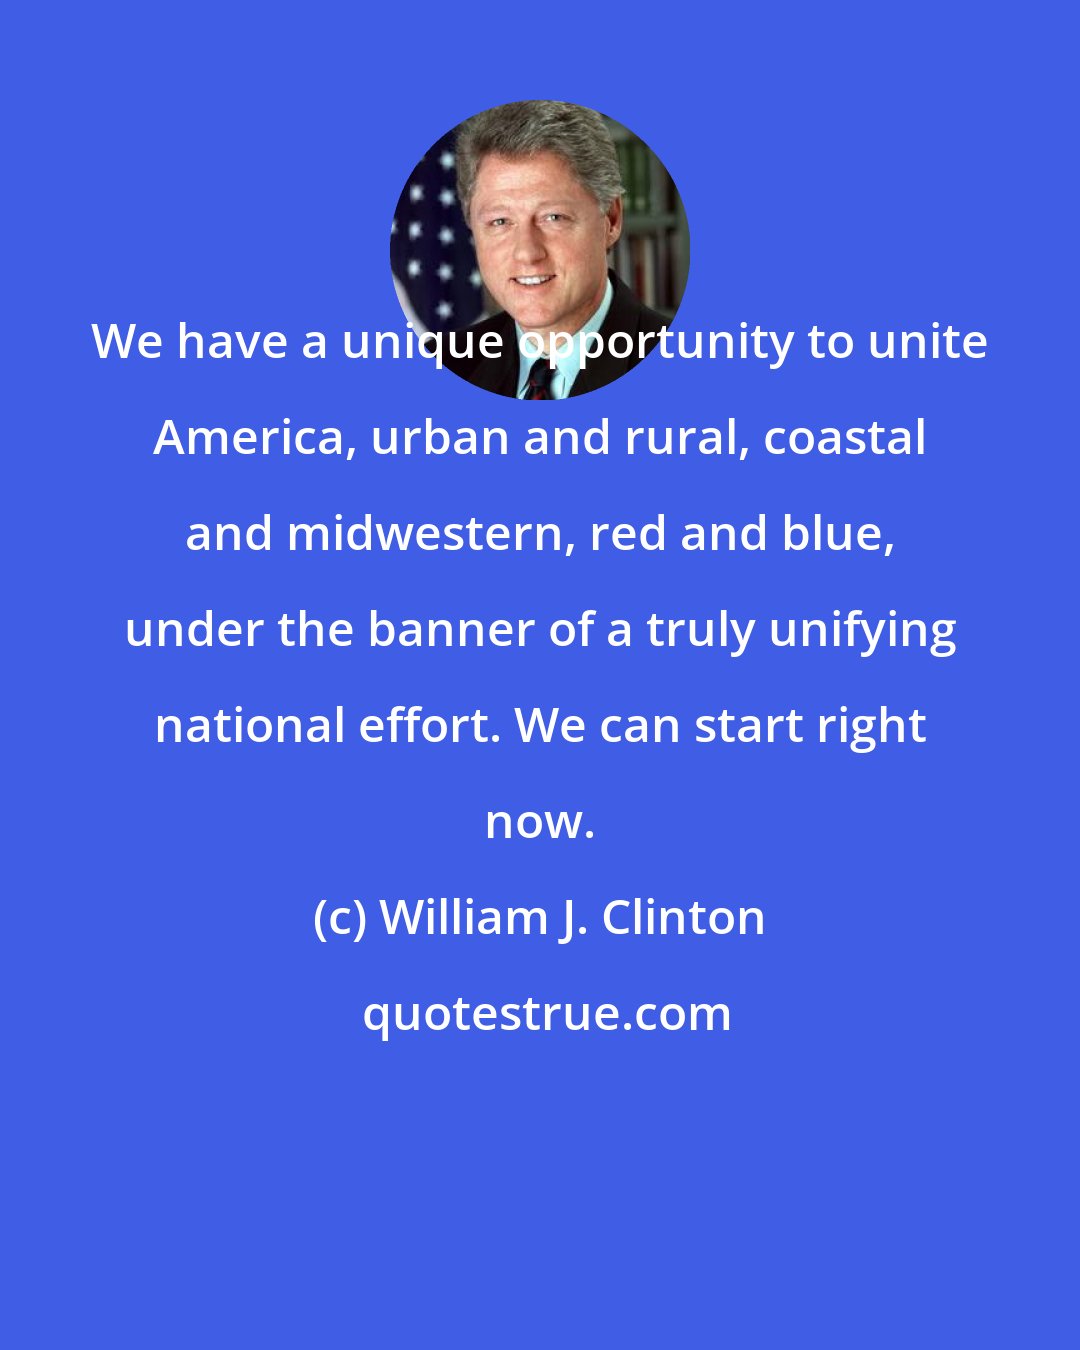 William J. Clinton: We have a unique opportunity to unite America, urban and rural, coastal and midwestern, red and blue, under the banner of a truly unifying national effort. We can start right now.